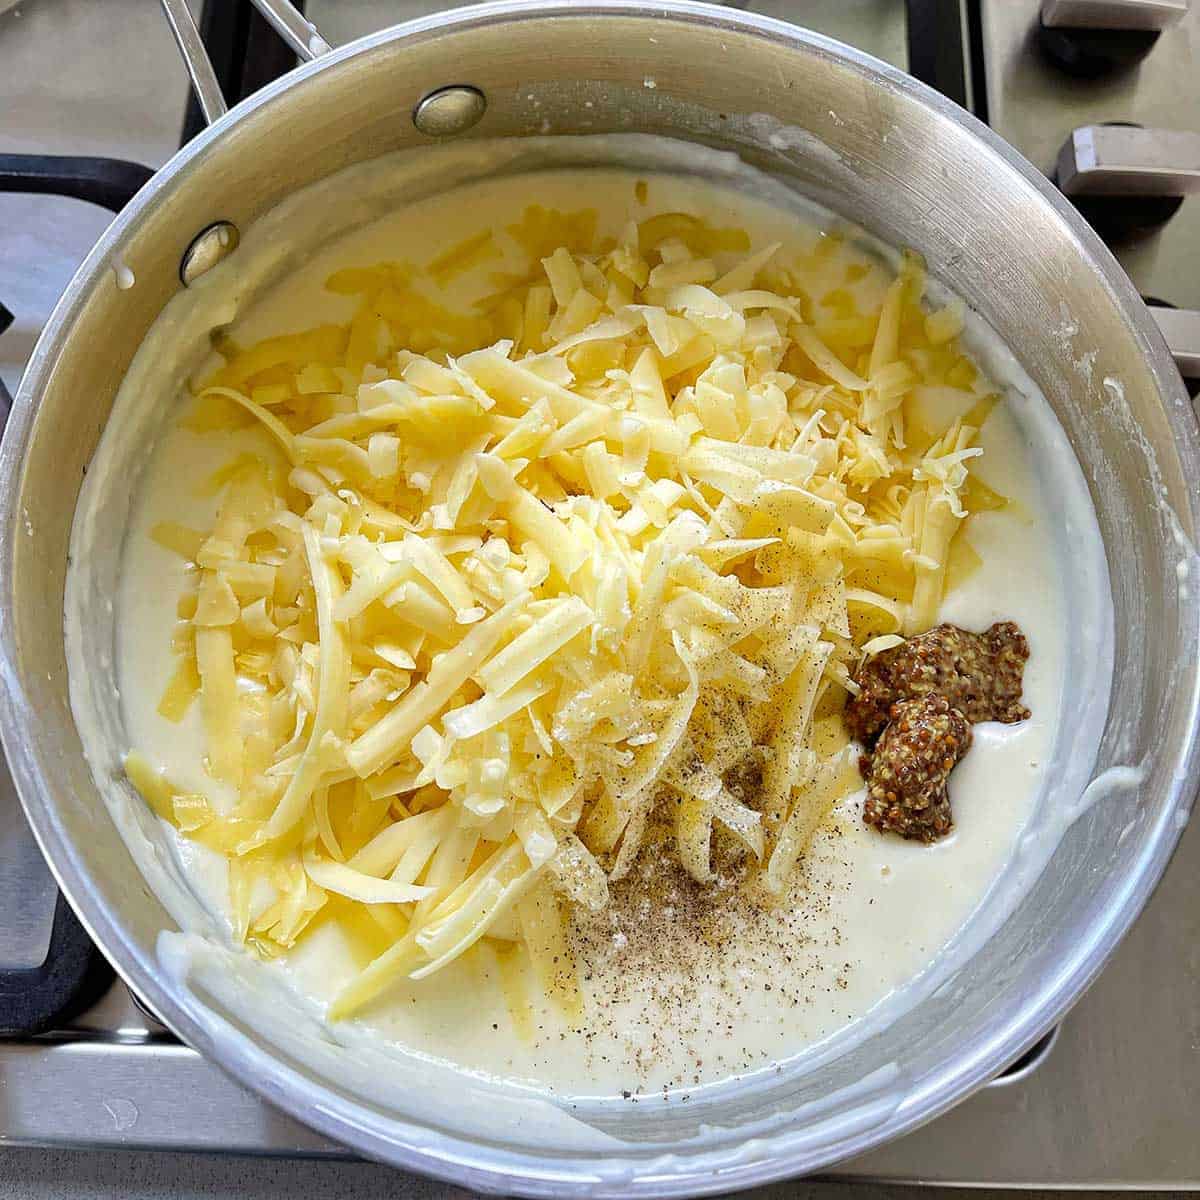 Cheese and mustard being added to a saucepan with cheese sauce in it